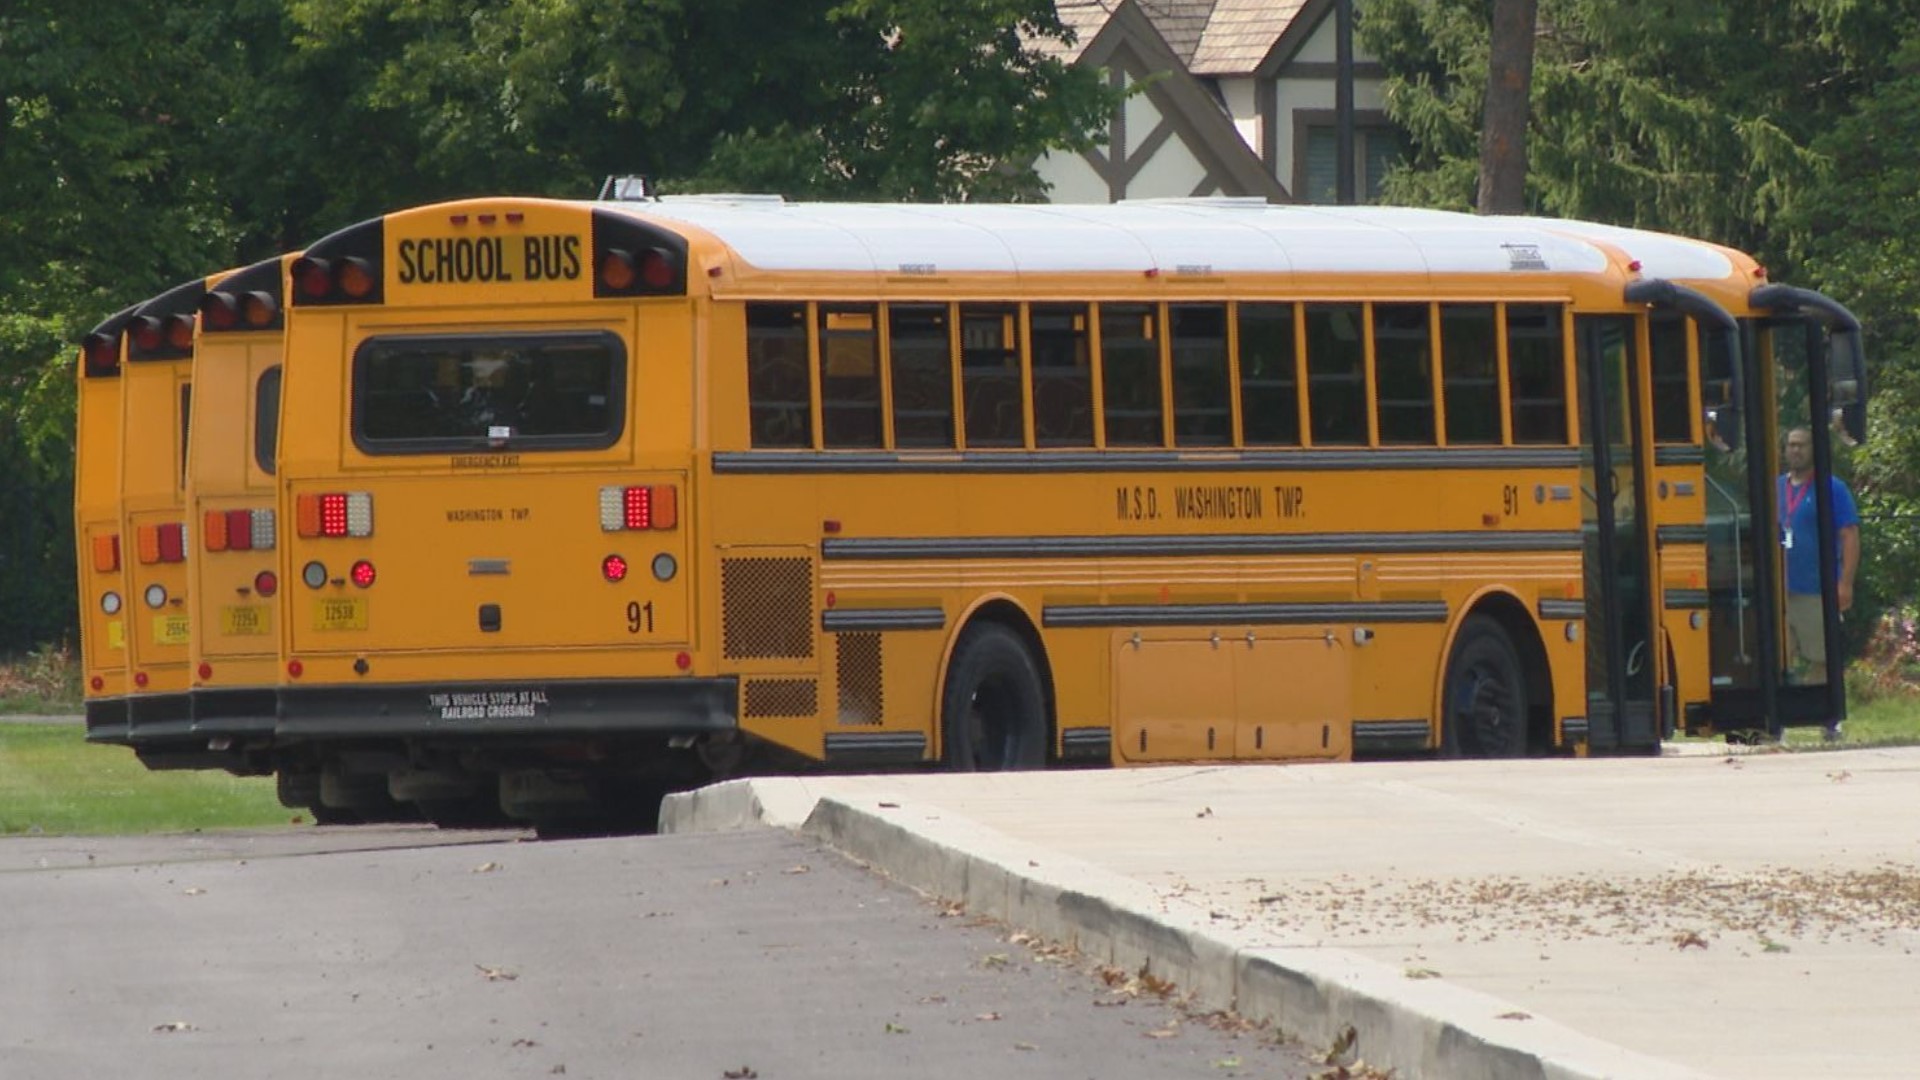 There's a lot of frustrated parents in Washington Township tonight after a bus driver shortage caused some problems getting to school.